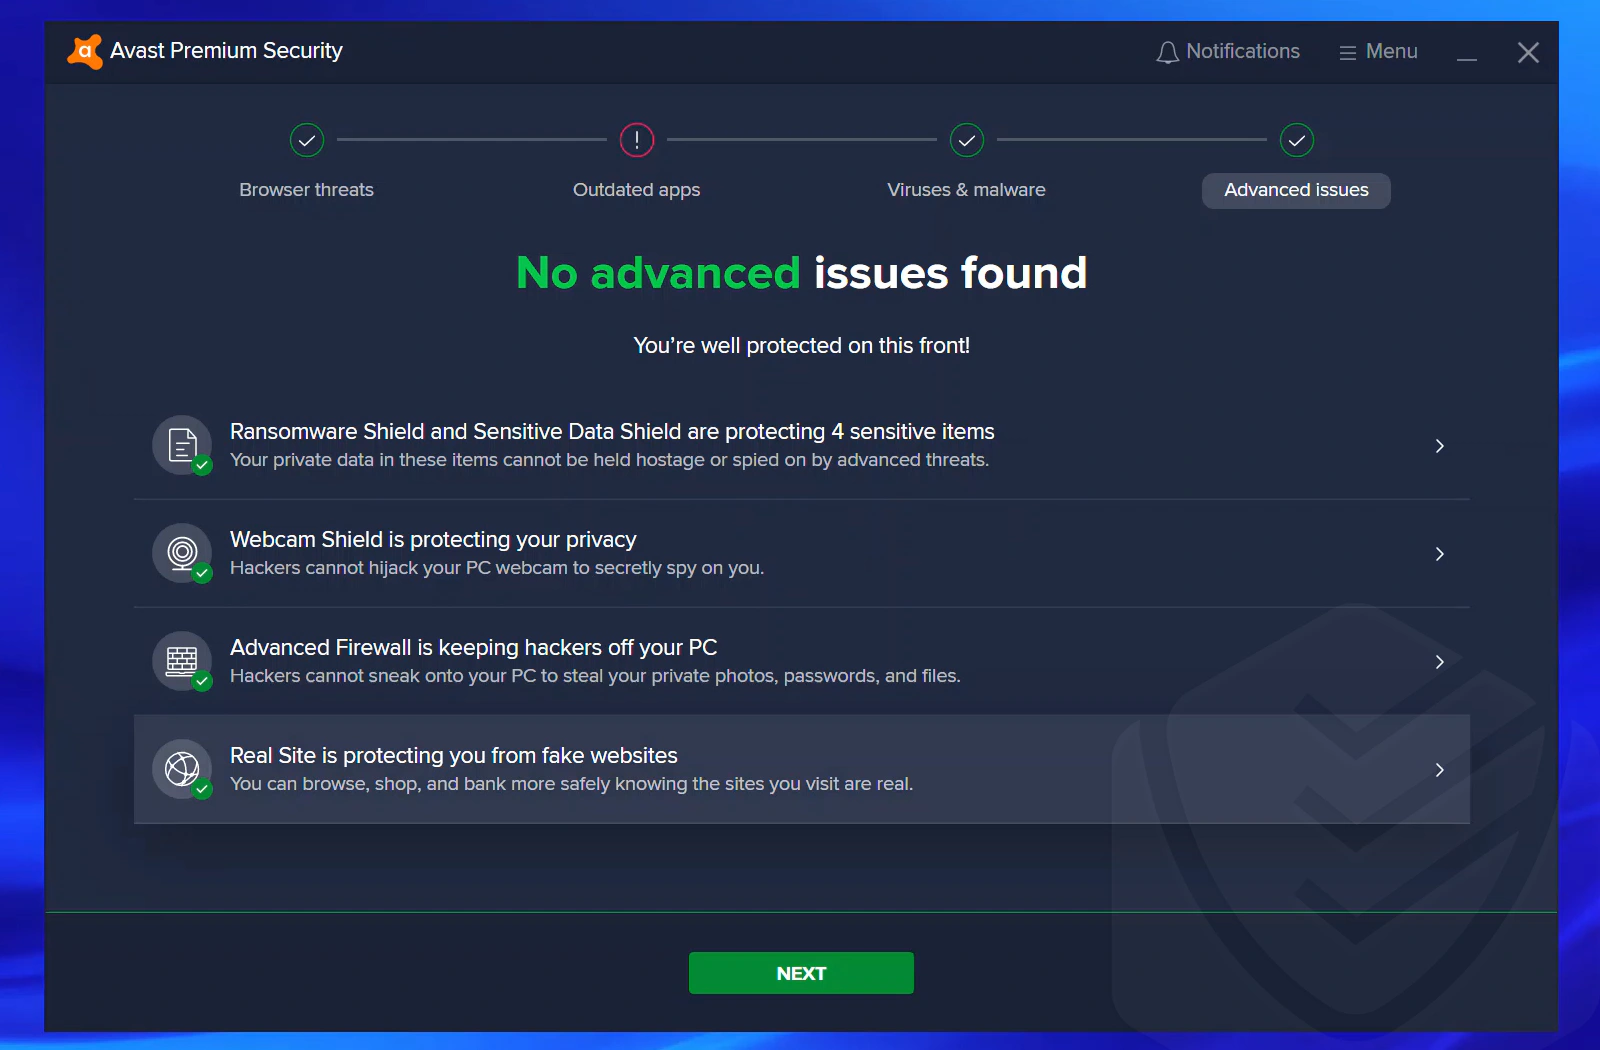 Avast Smart scan advanced issues results